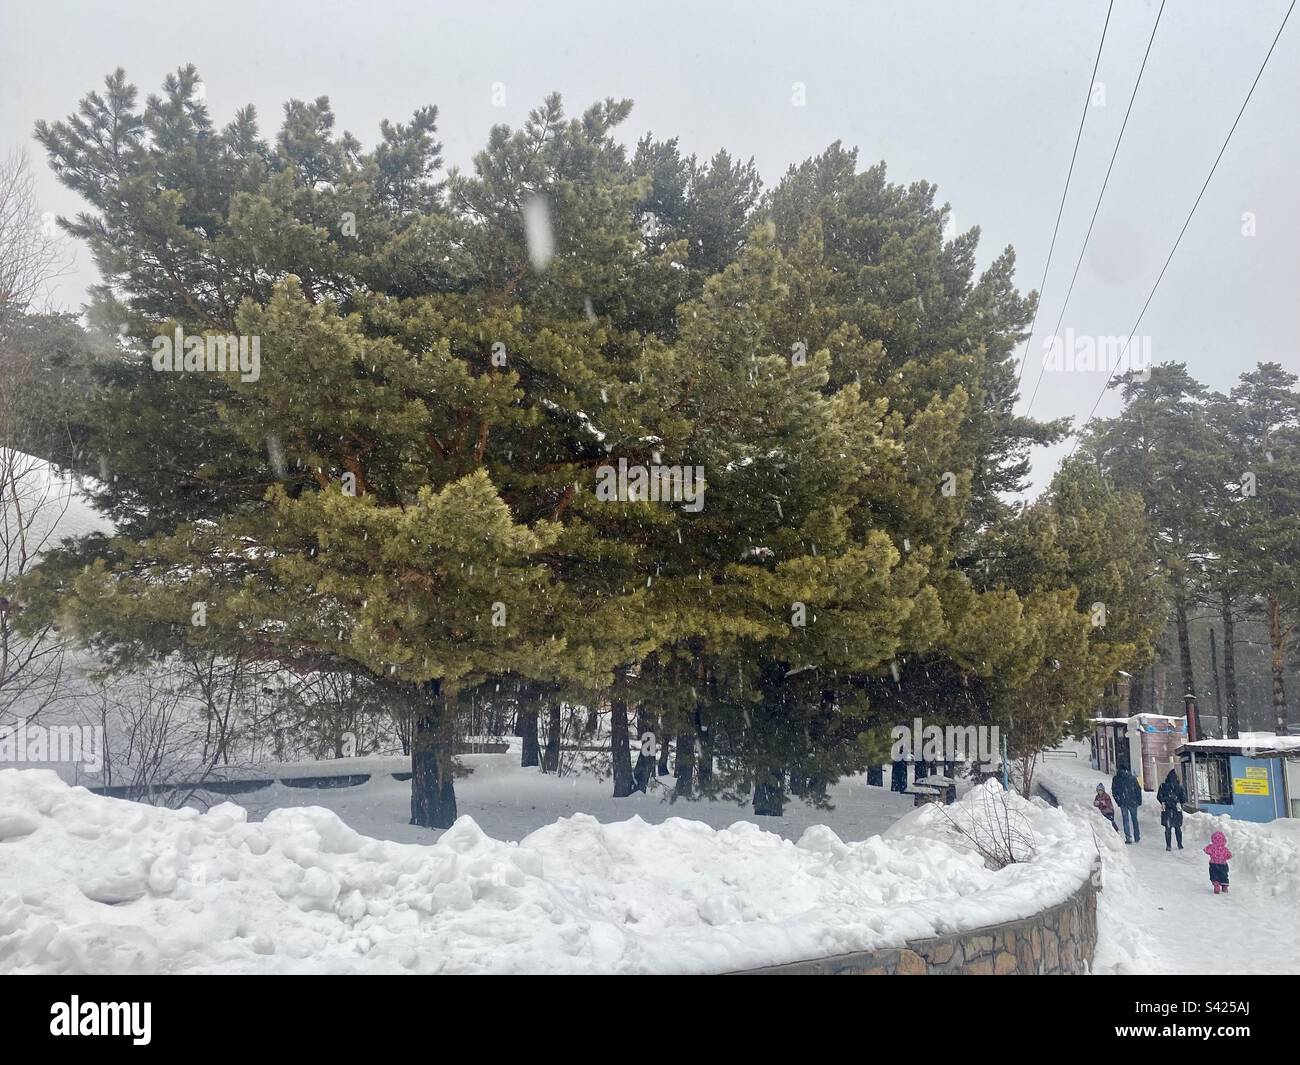 Large lush cedars grow in winter in a park with people and children walking along a trail in the snow in Siberia. Stock Photo